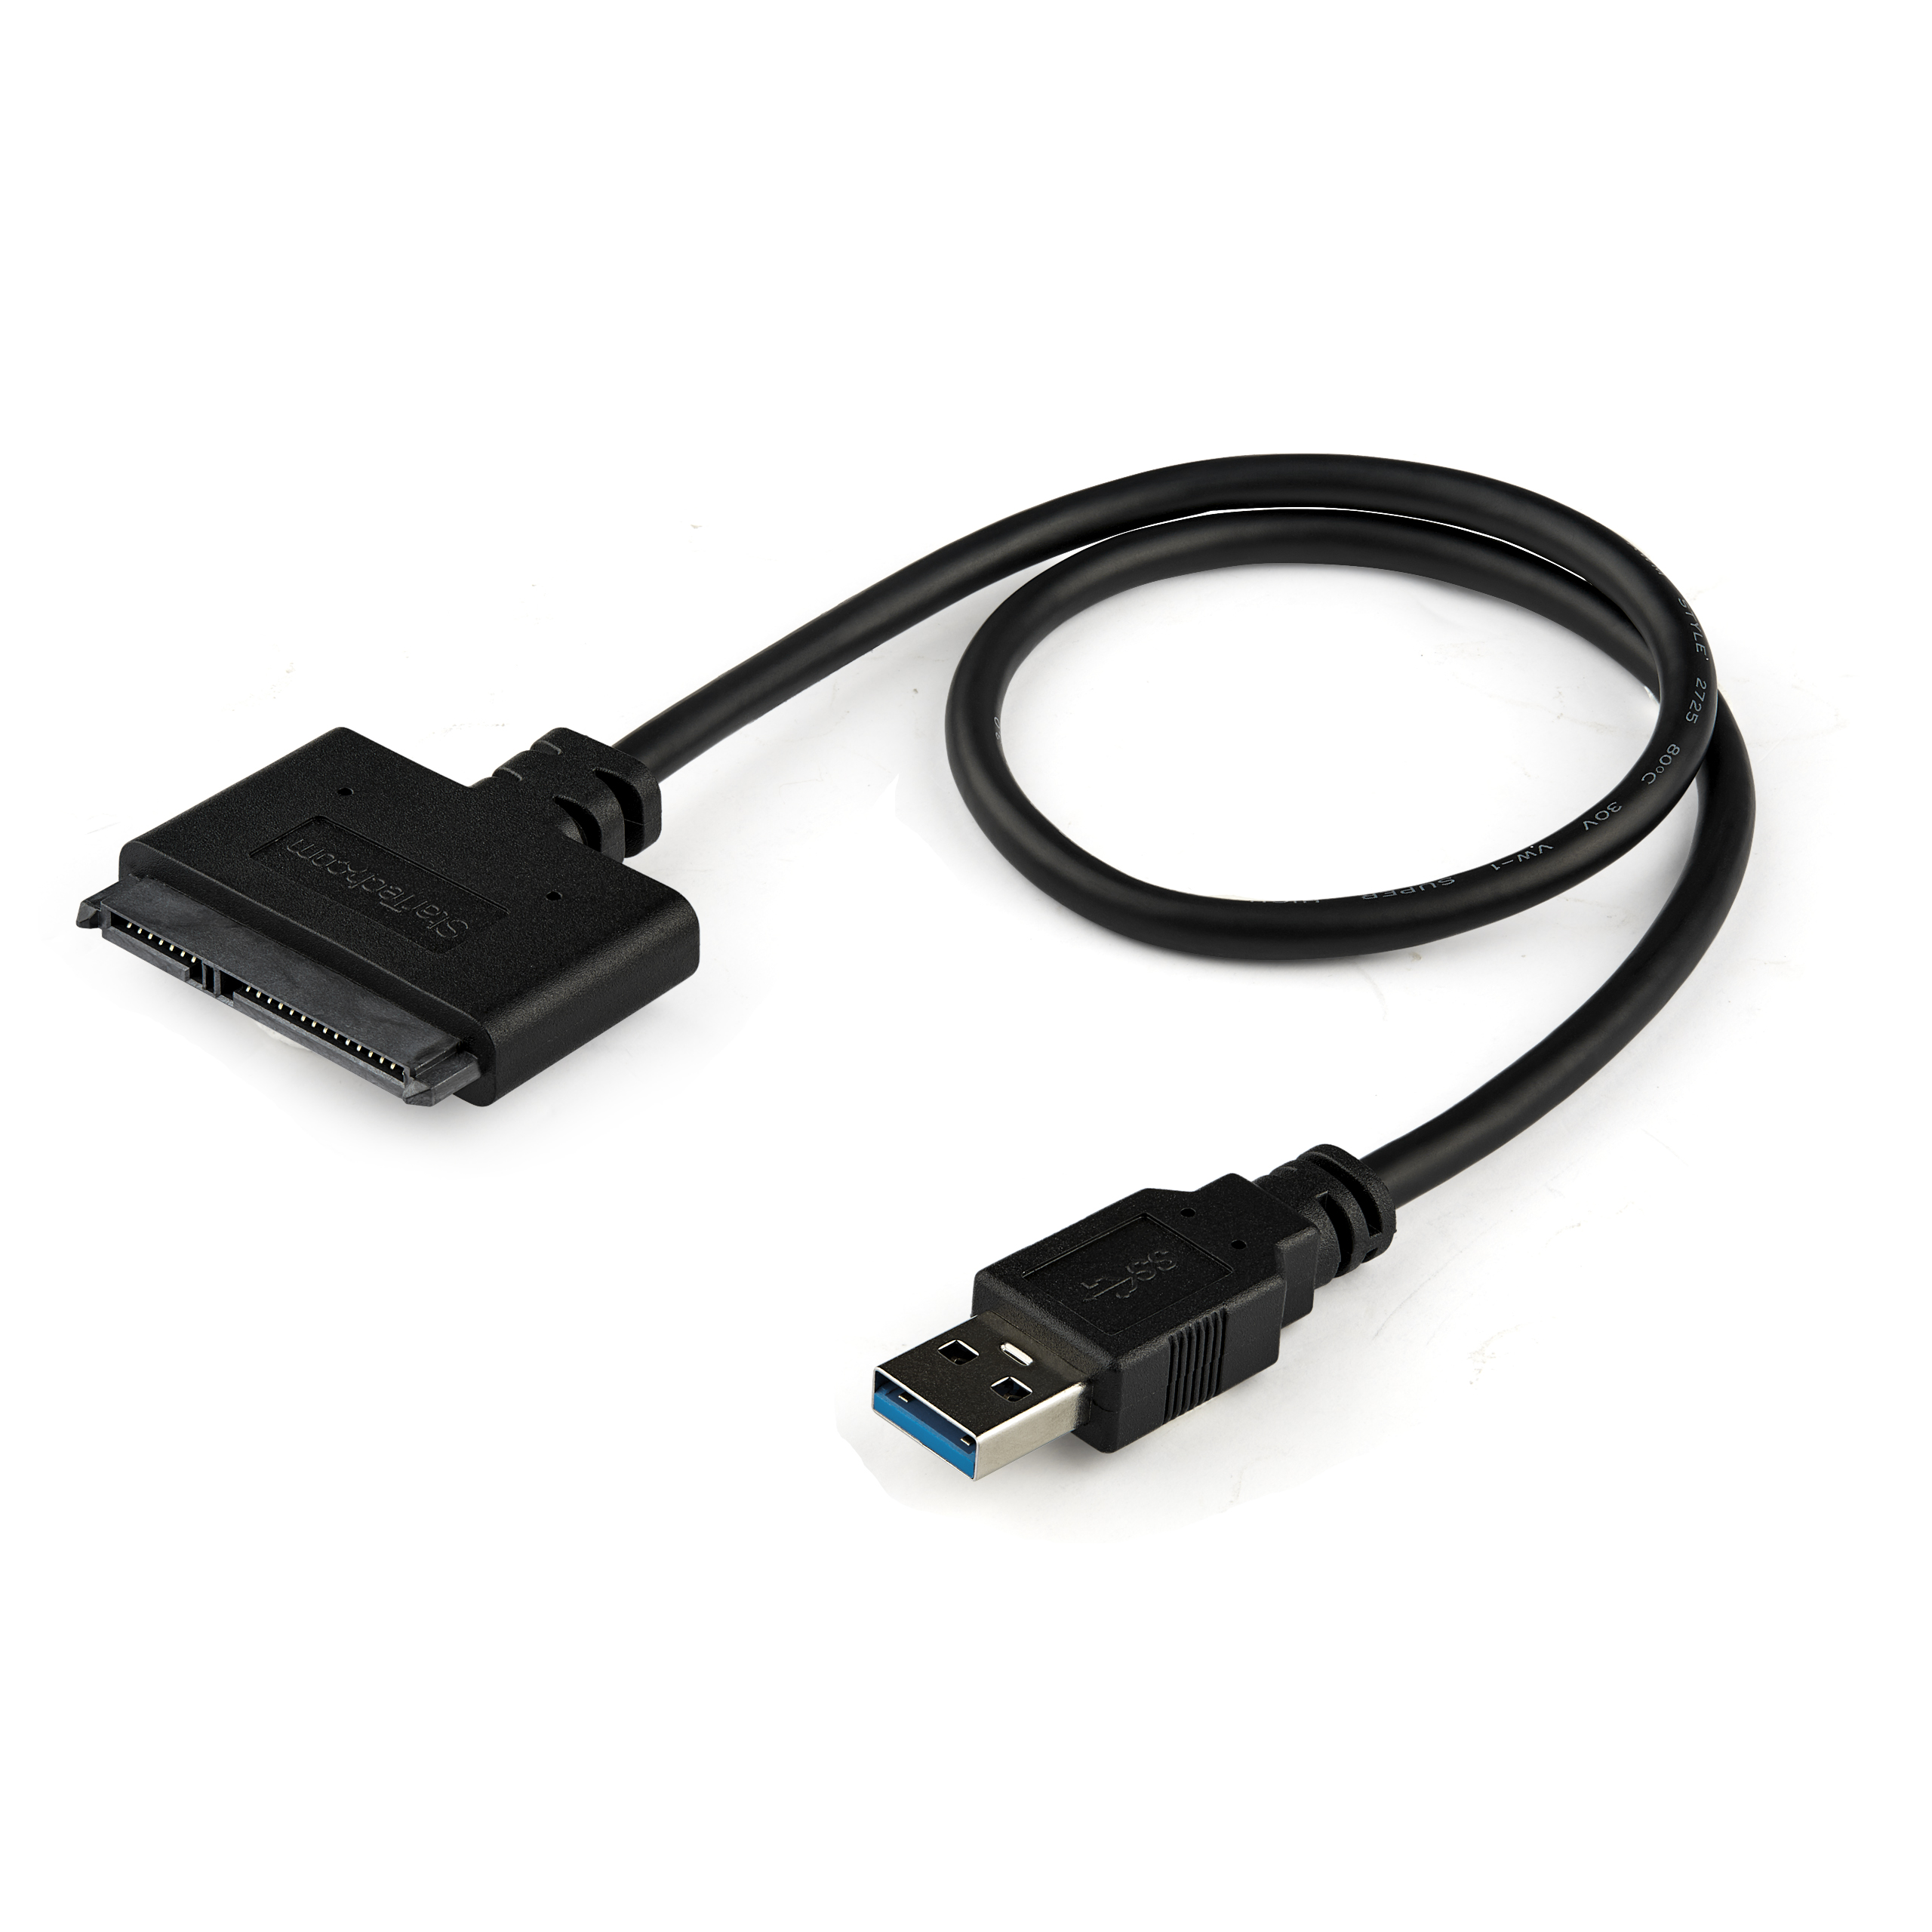 StarTech.com SATA to USB Cable - USB 3.0 to 2.5” SATA III Hard Drive Adapter - External Converter for SSD/HDD Data Transfer - image 1 of 5